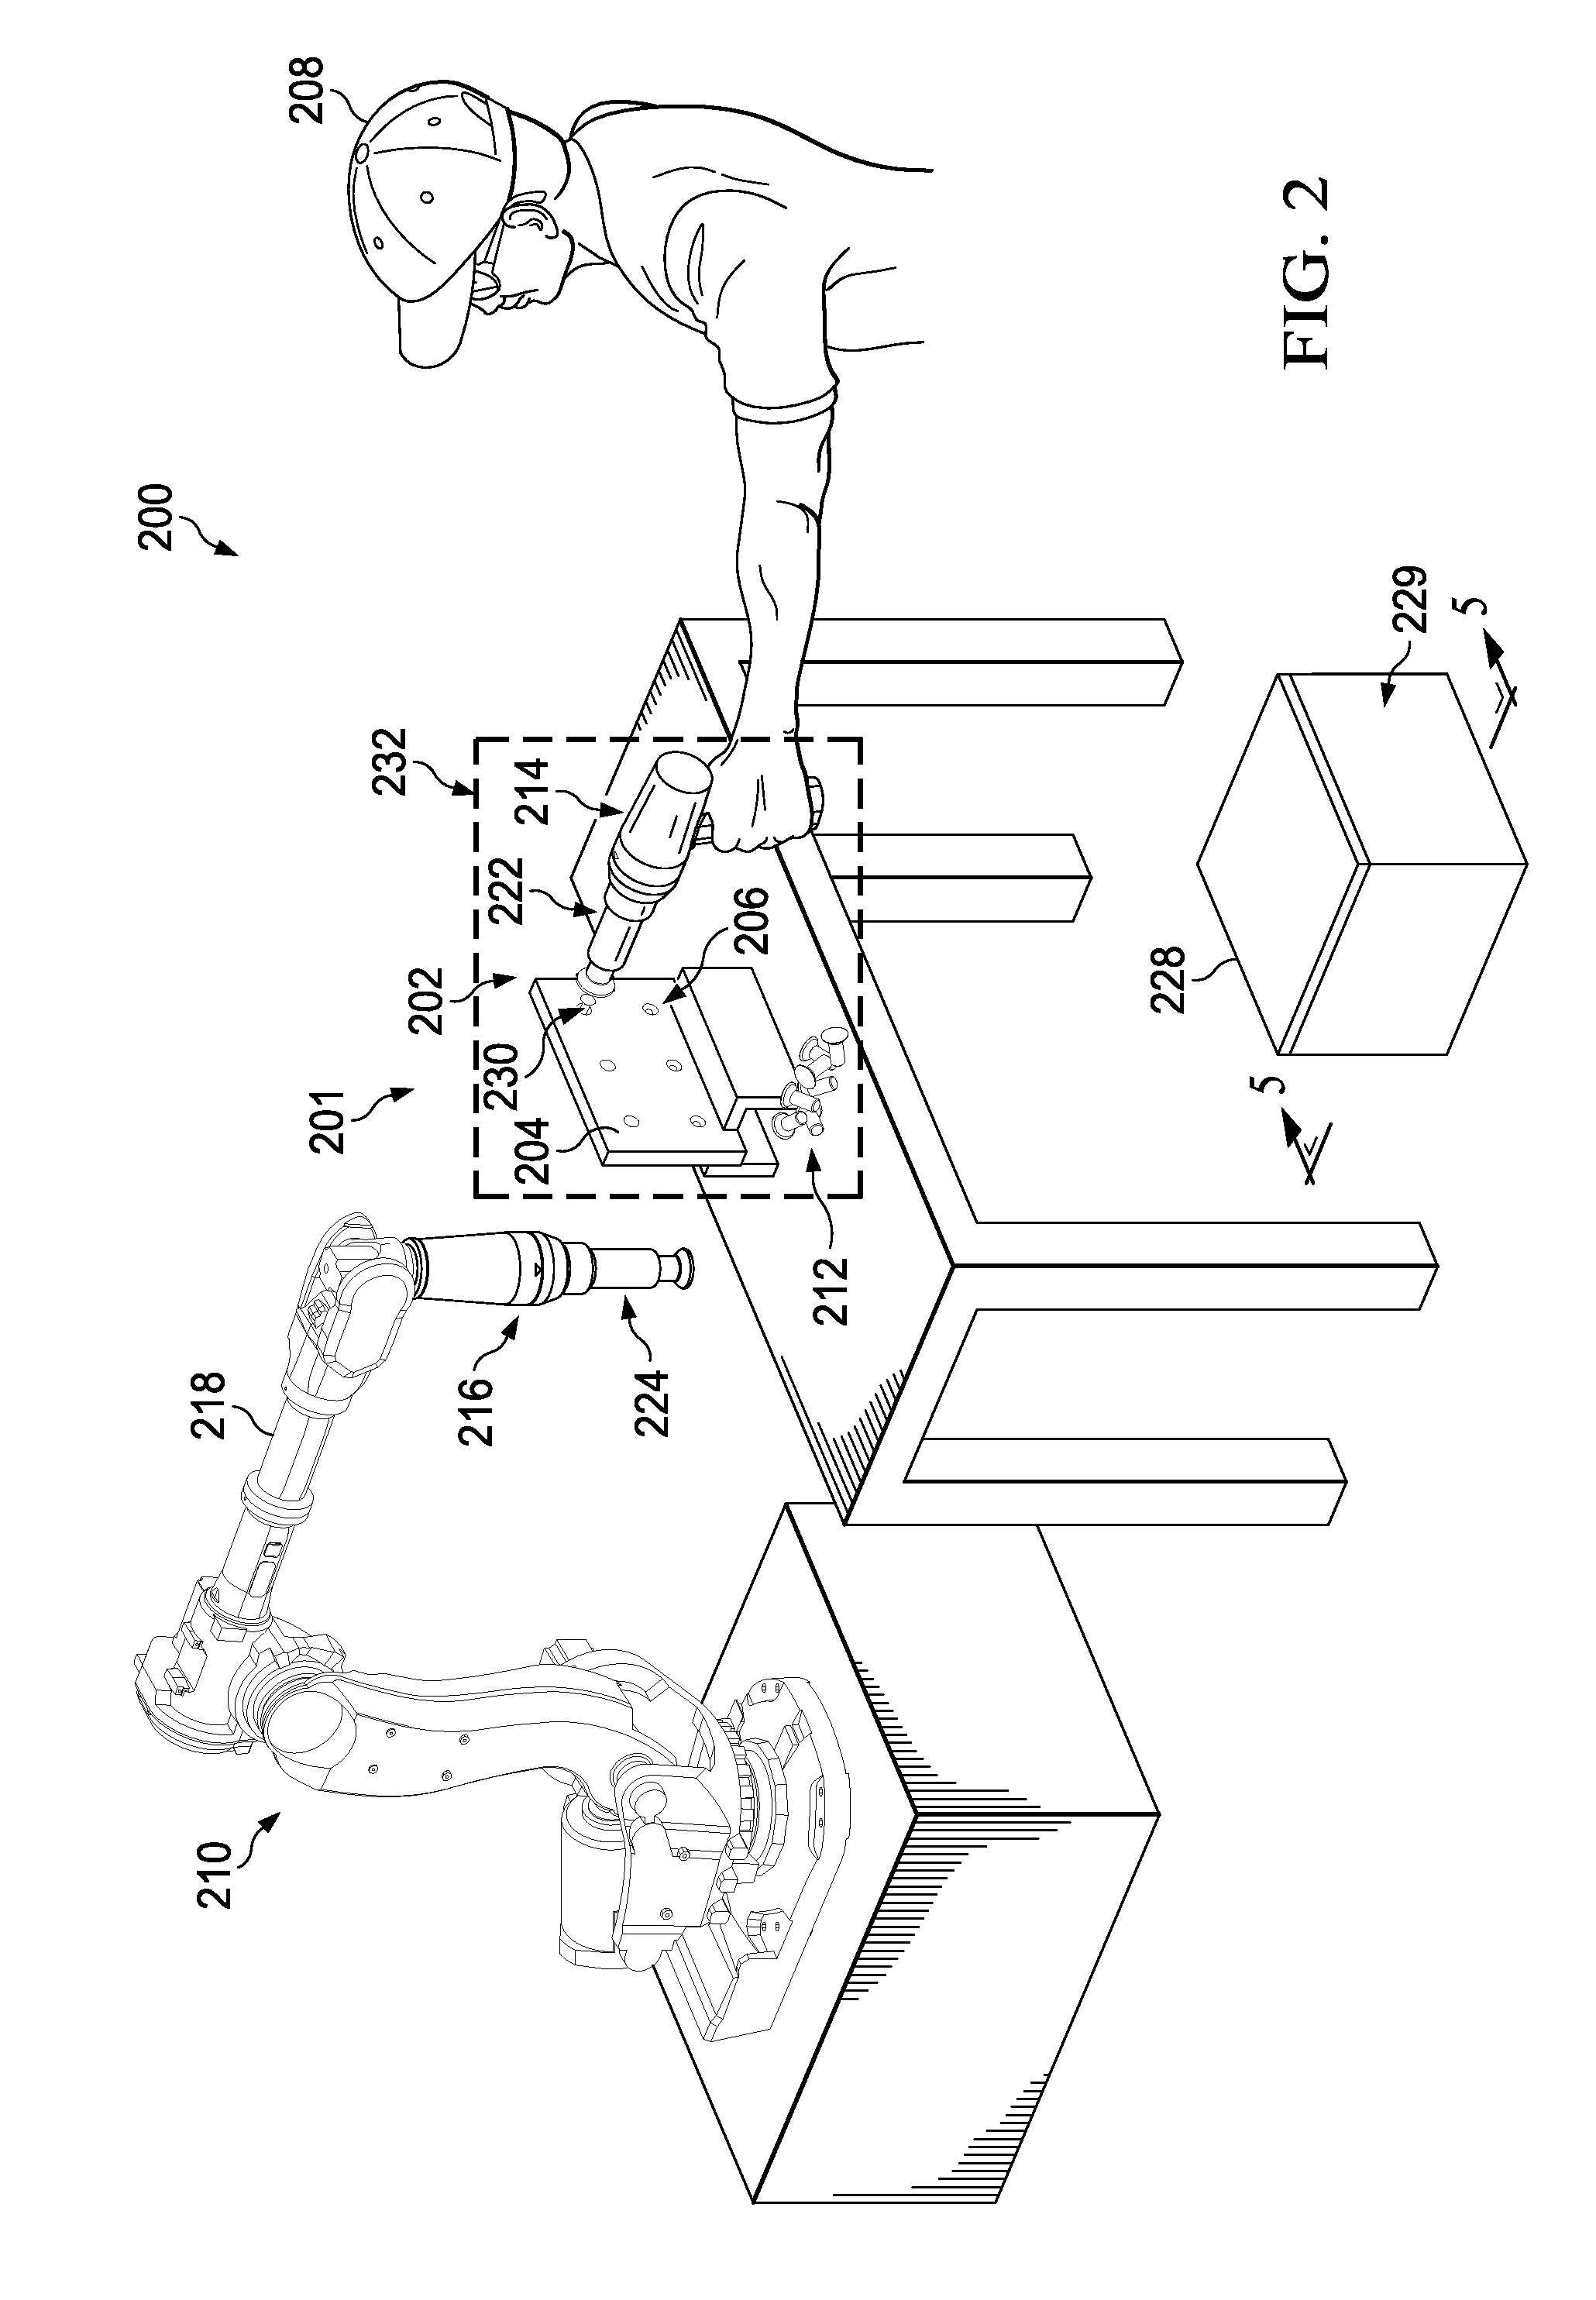 Method and System for Installing Fasteners with Electromagnetic Effect Protection